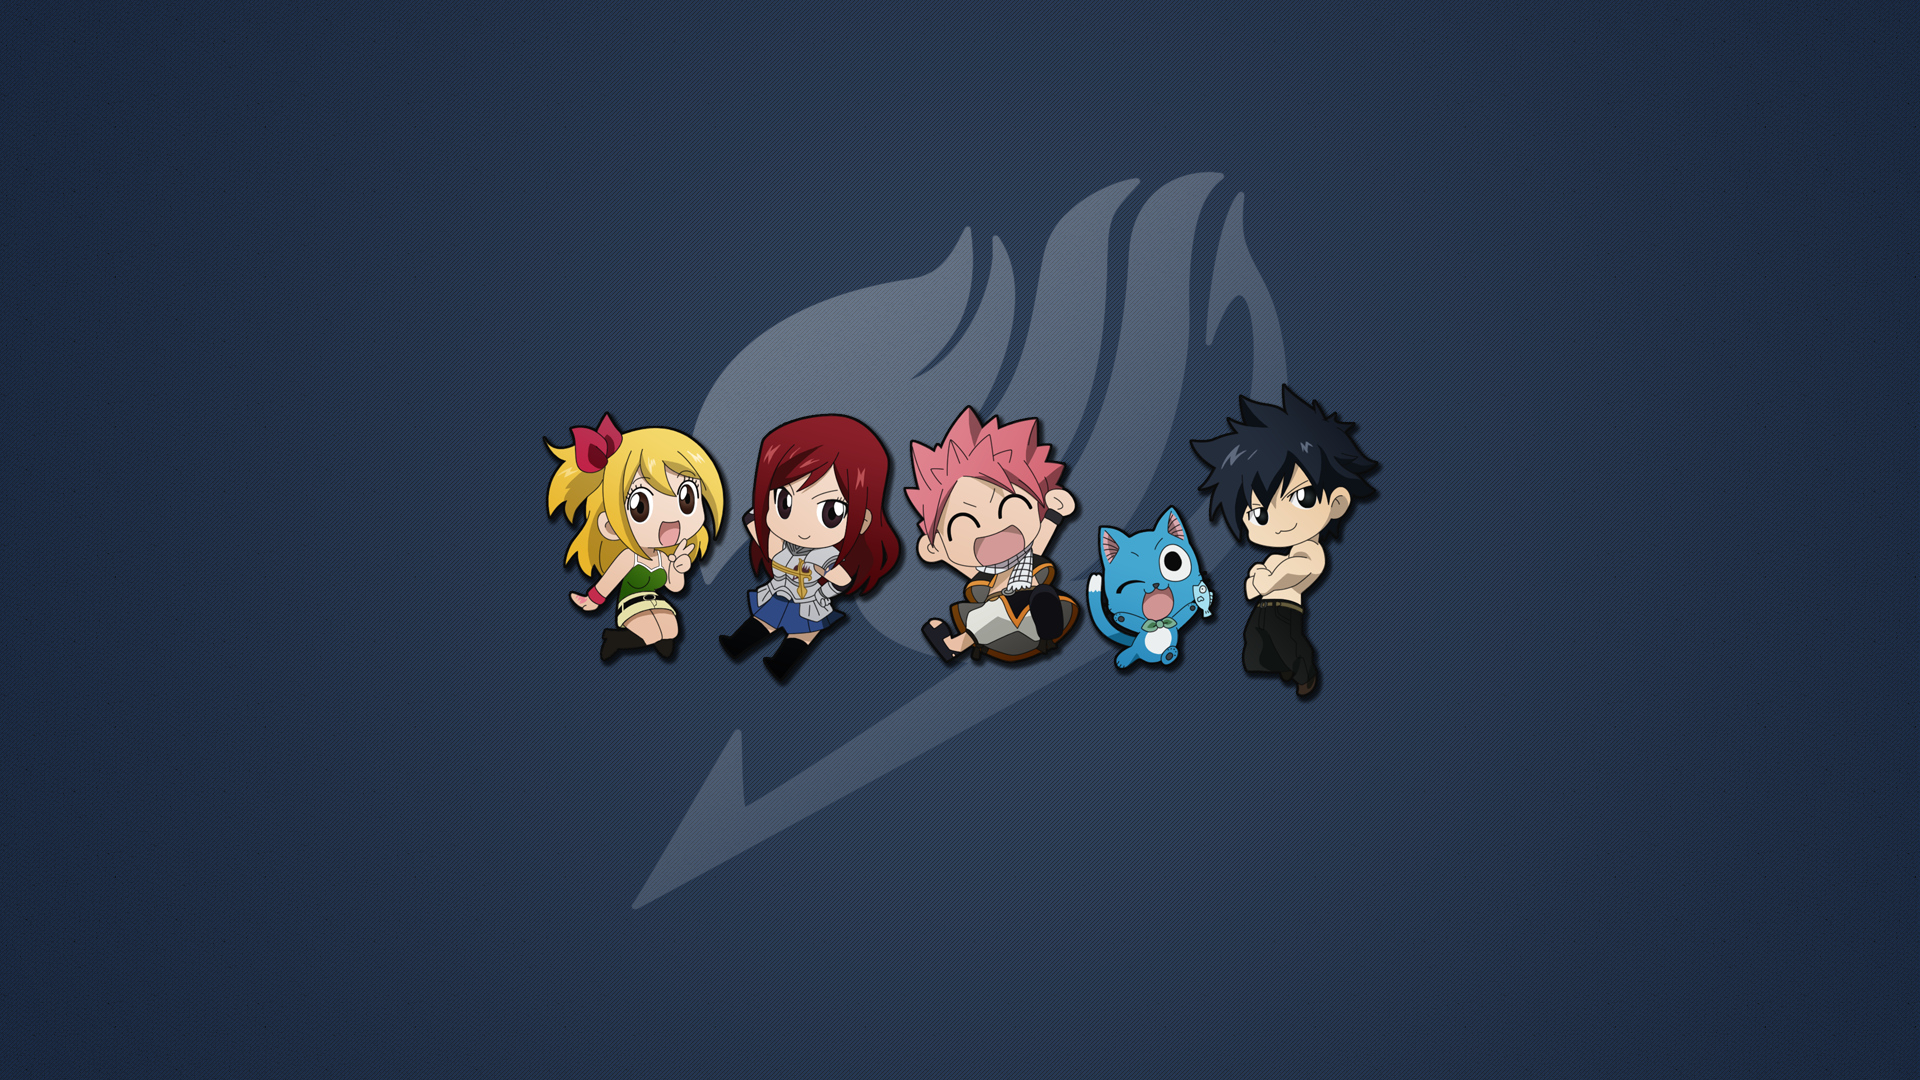 Fairy Tail wallpaper by LordMycelium on